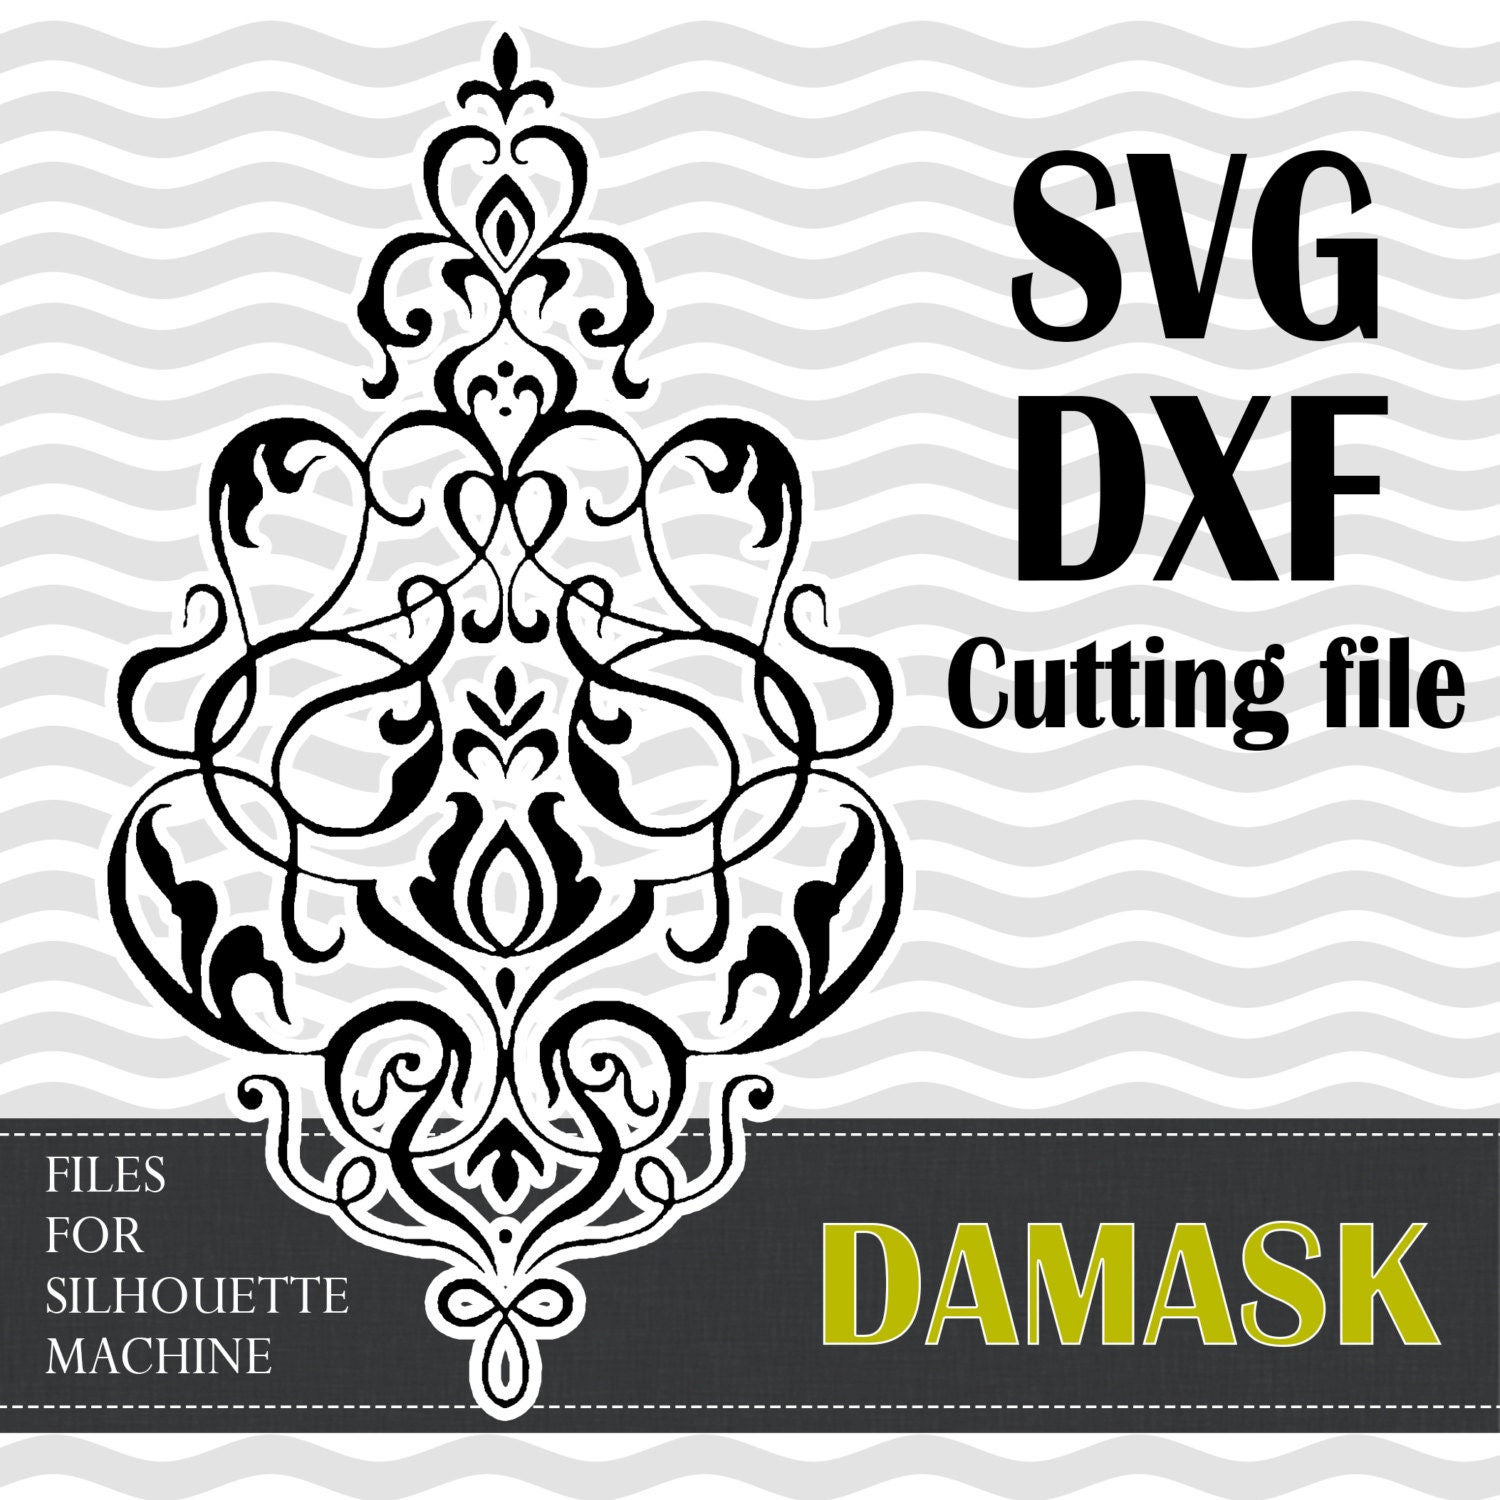 Download Damask designs SVG DXF vinyl cut files for use with